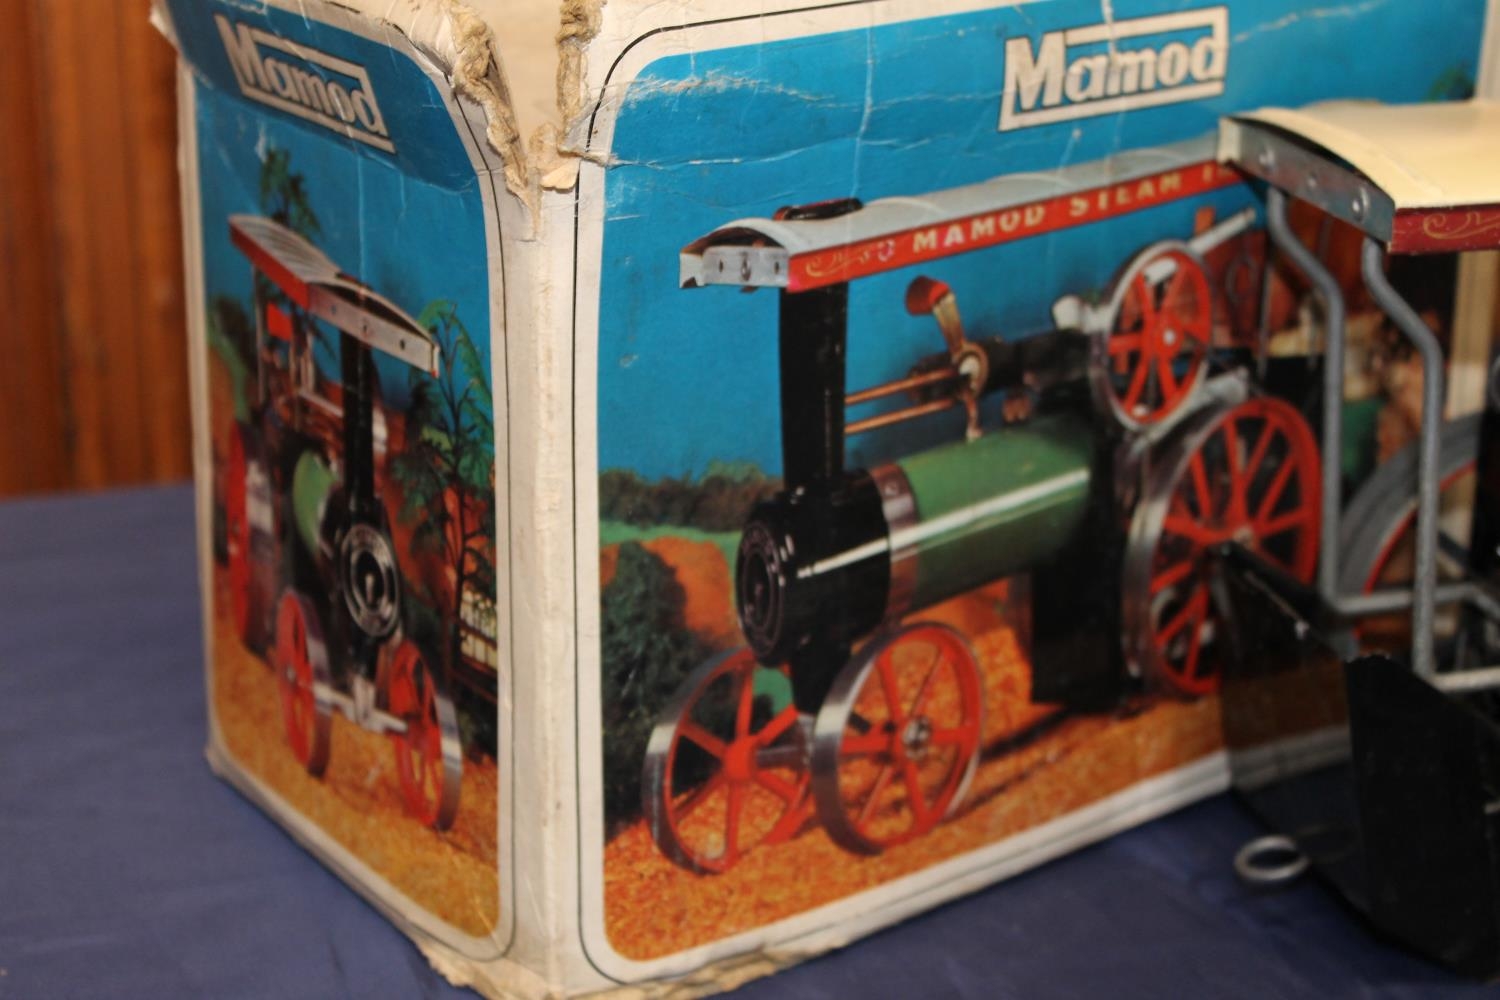 Malins (Engineers) Ltd, Mamod TE1a Steam Tractor live steam traction engine, boxed. - Image 3 of 4